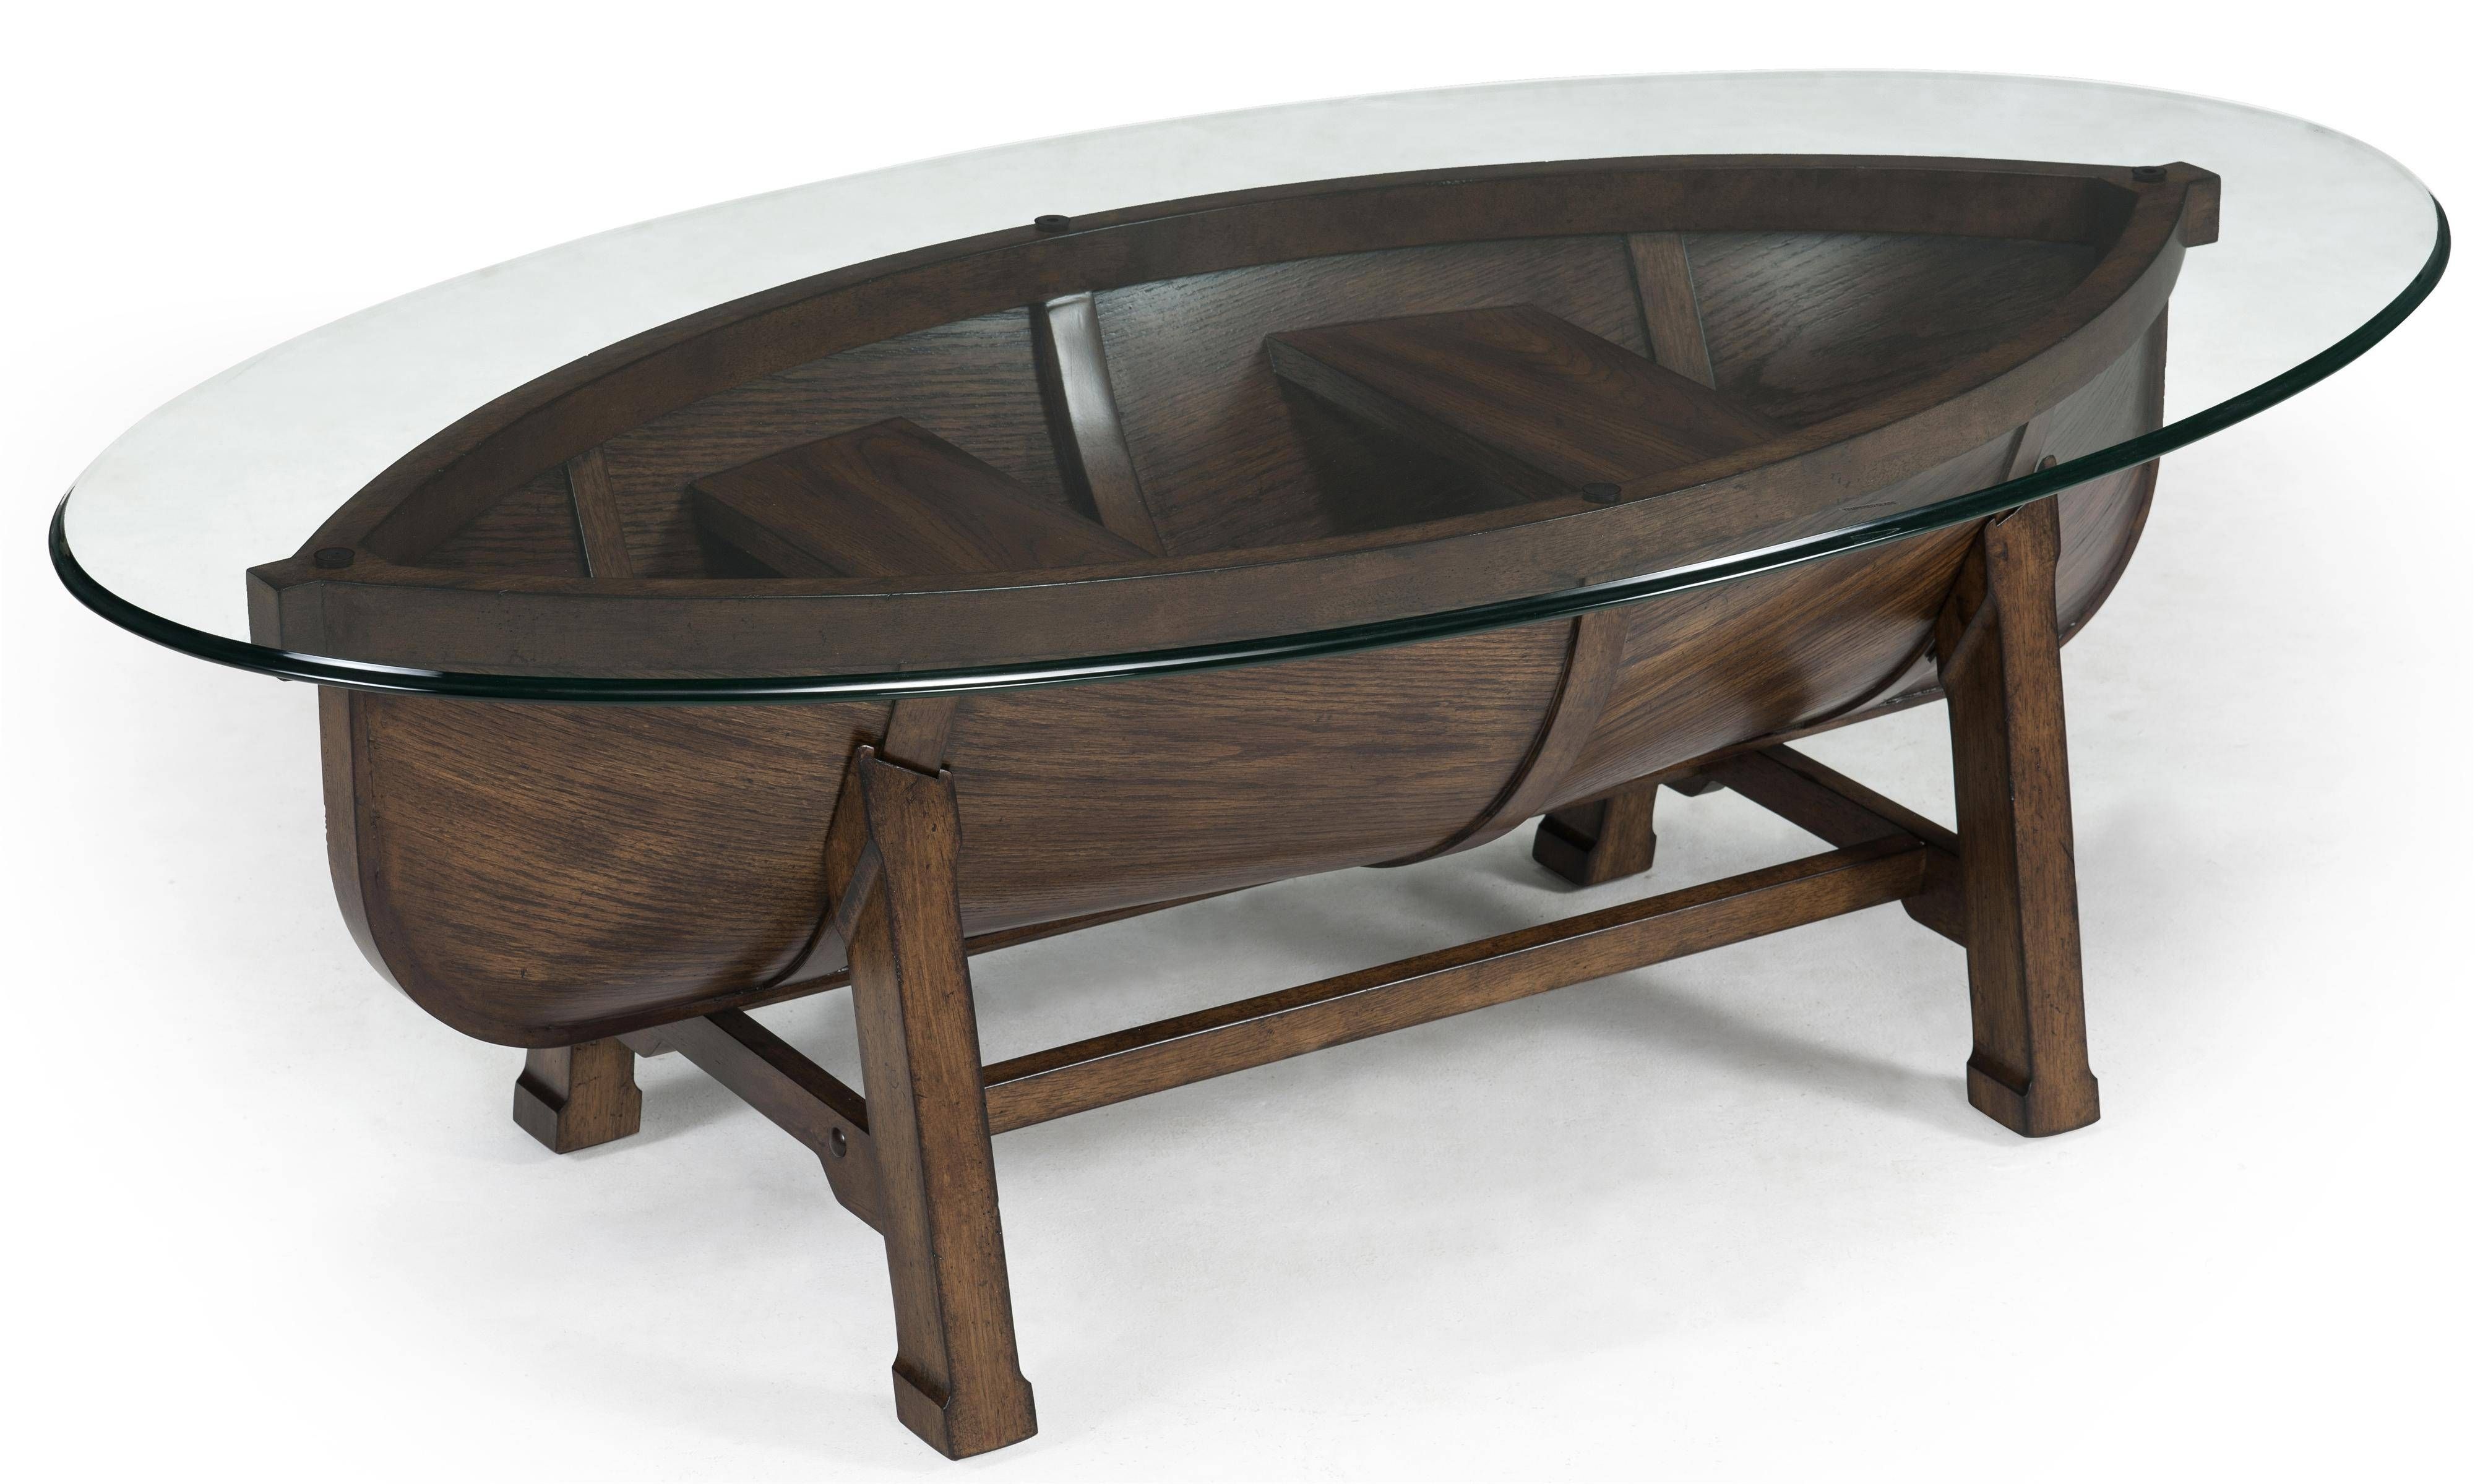 Magnussen Home Beaufort Boat Hull Cocktail Table With Trestle Base For Oval Shaped Coffee Tables (View 6 of 30)